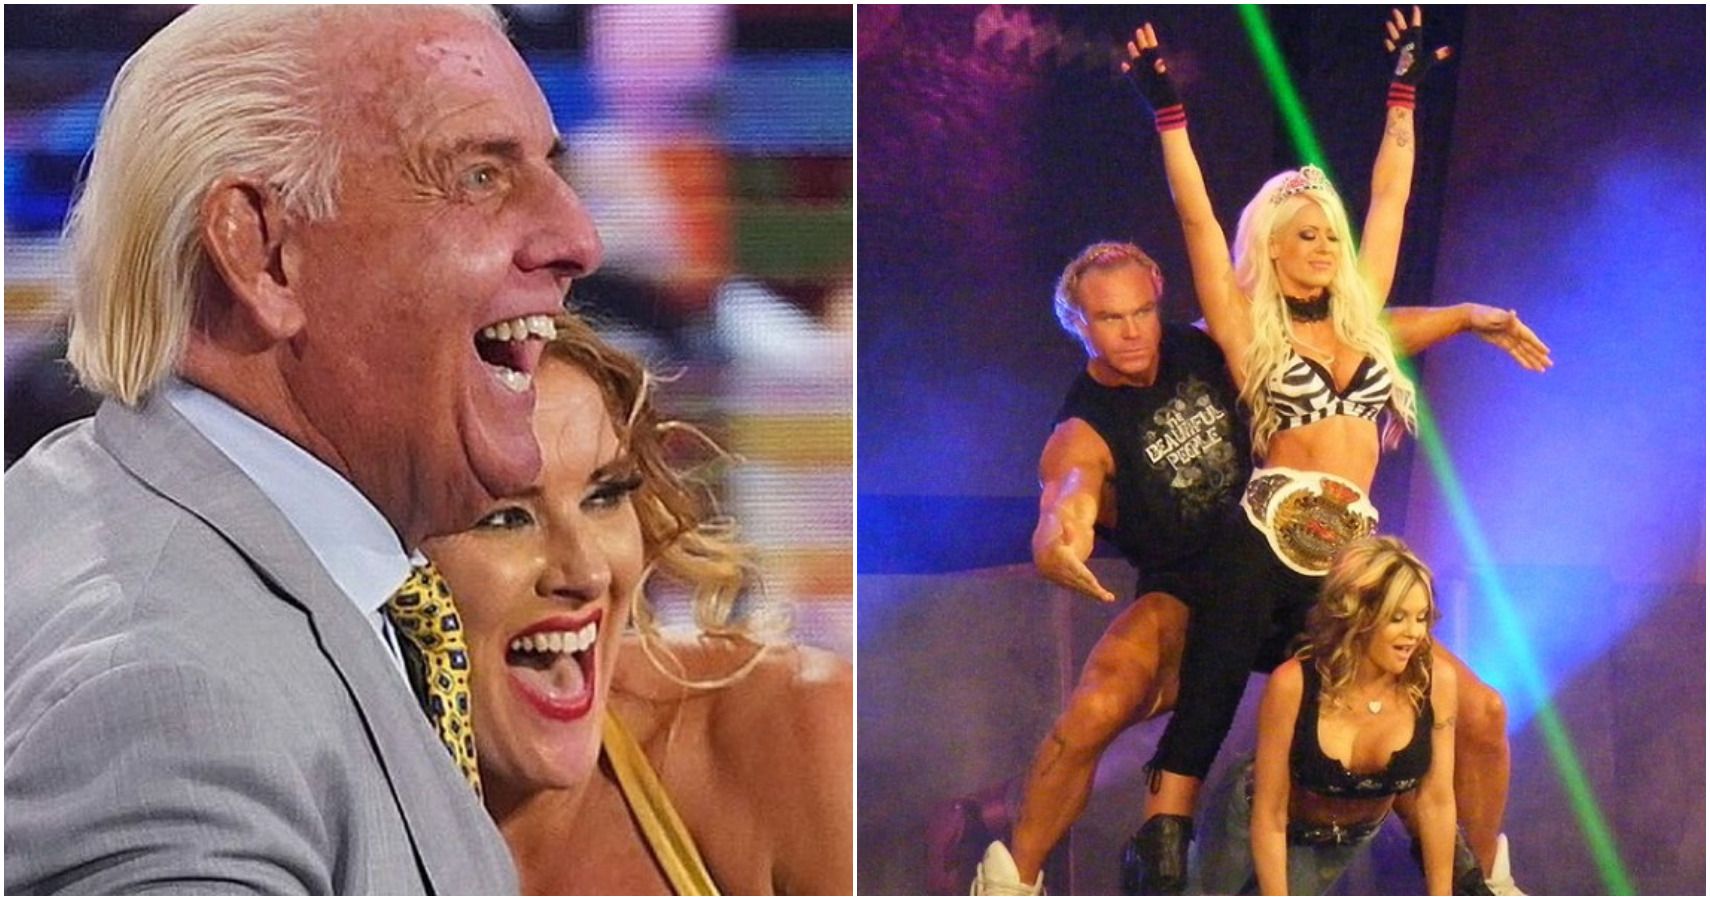 Ric Flair, Lacey Evans, The Beautiful People, Billy Gunn